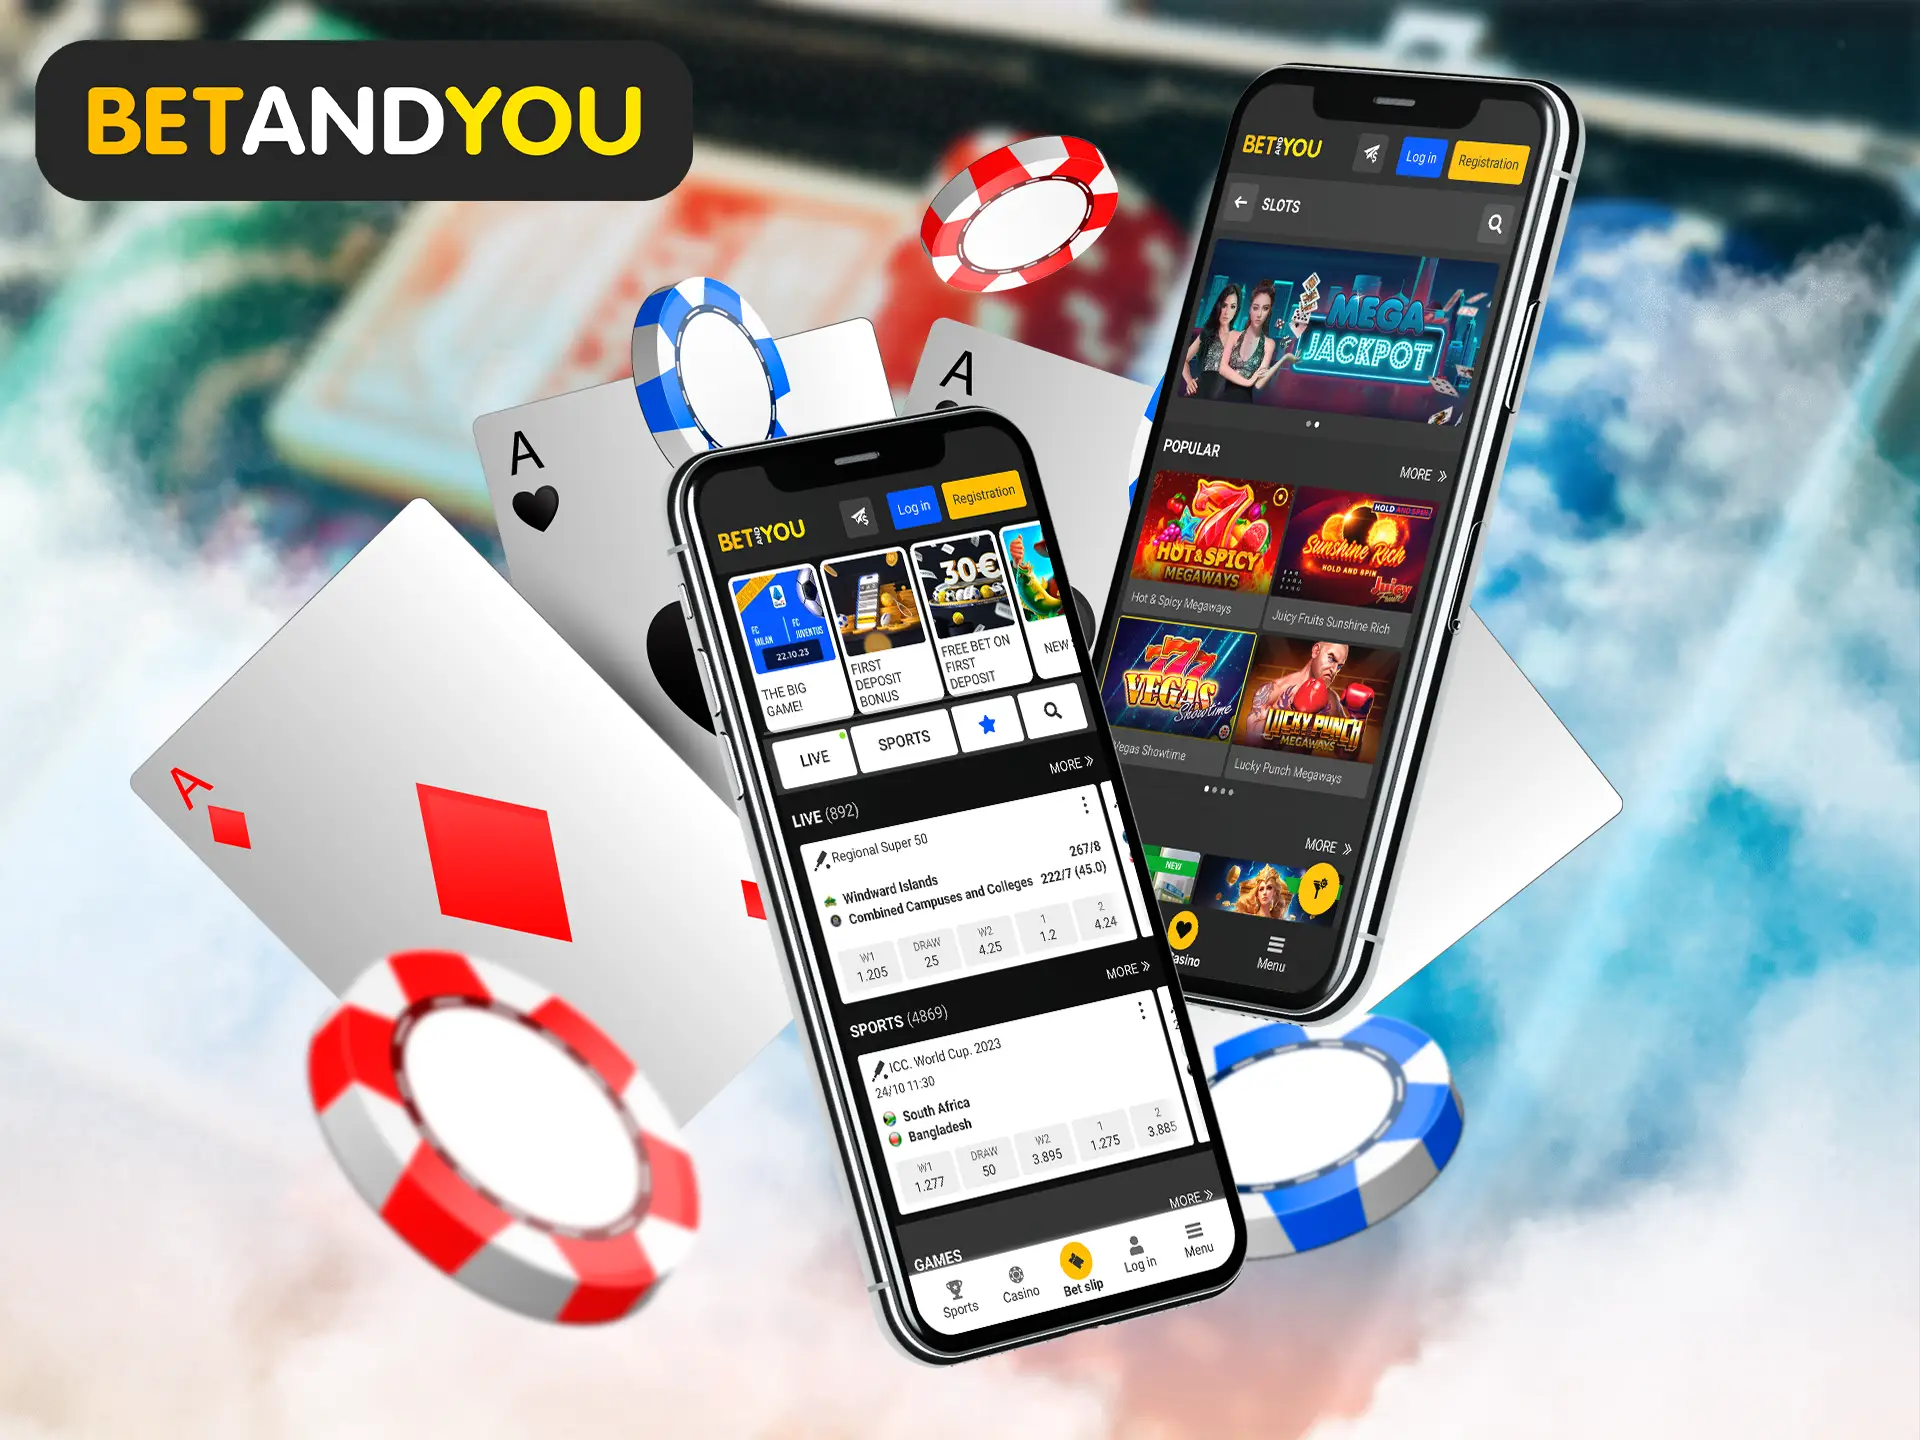 A variety of quality games await you on the Betandyou platform.